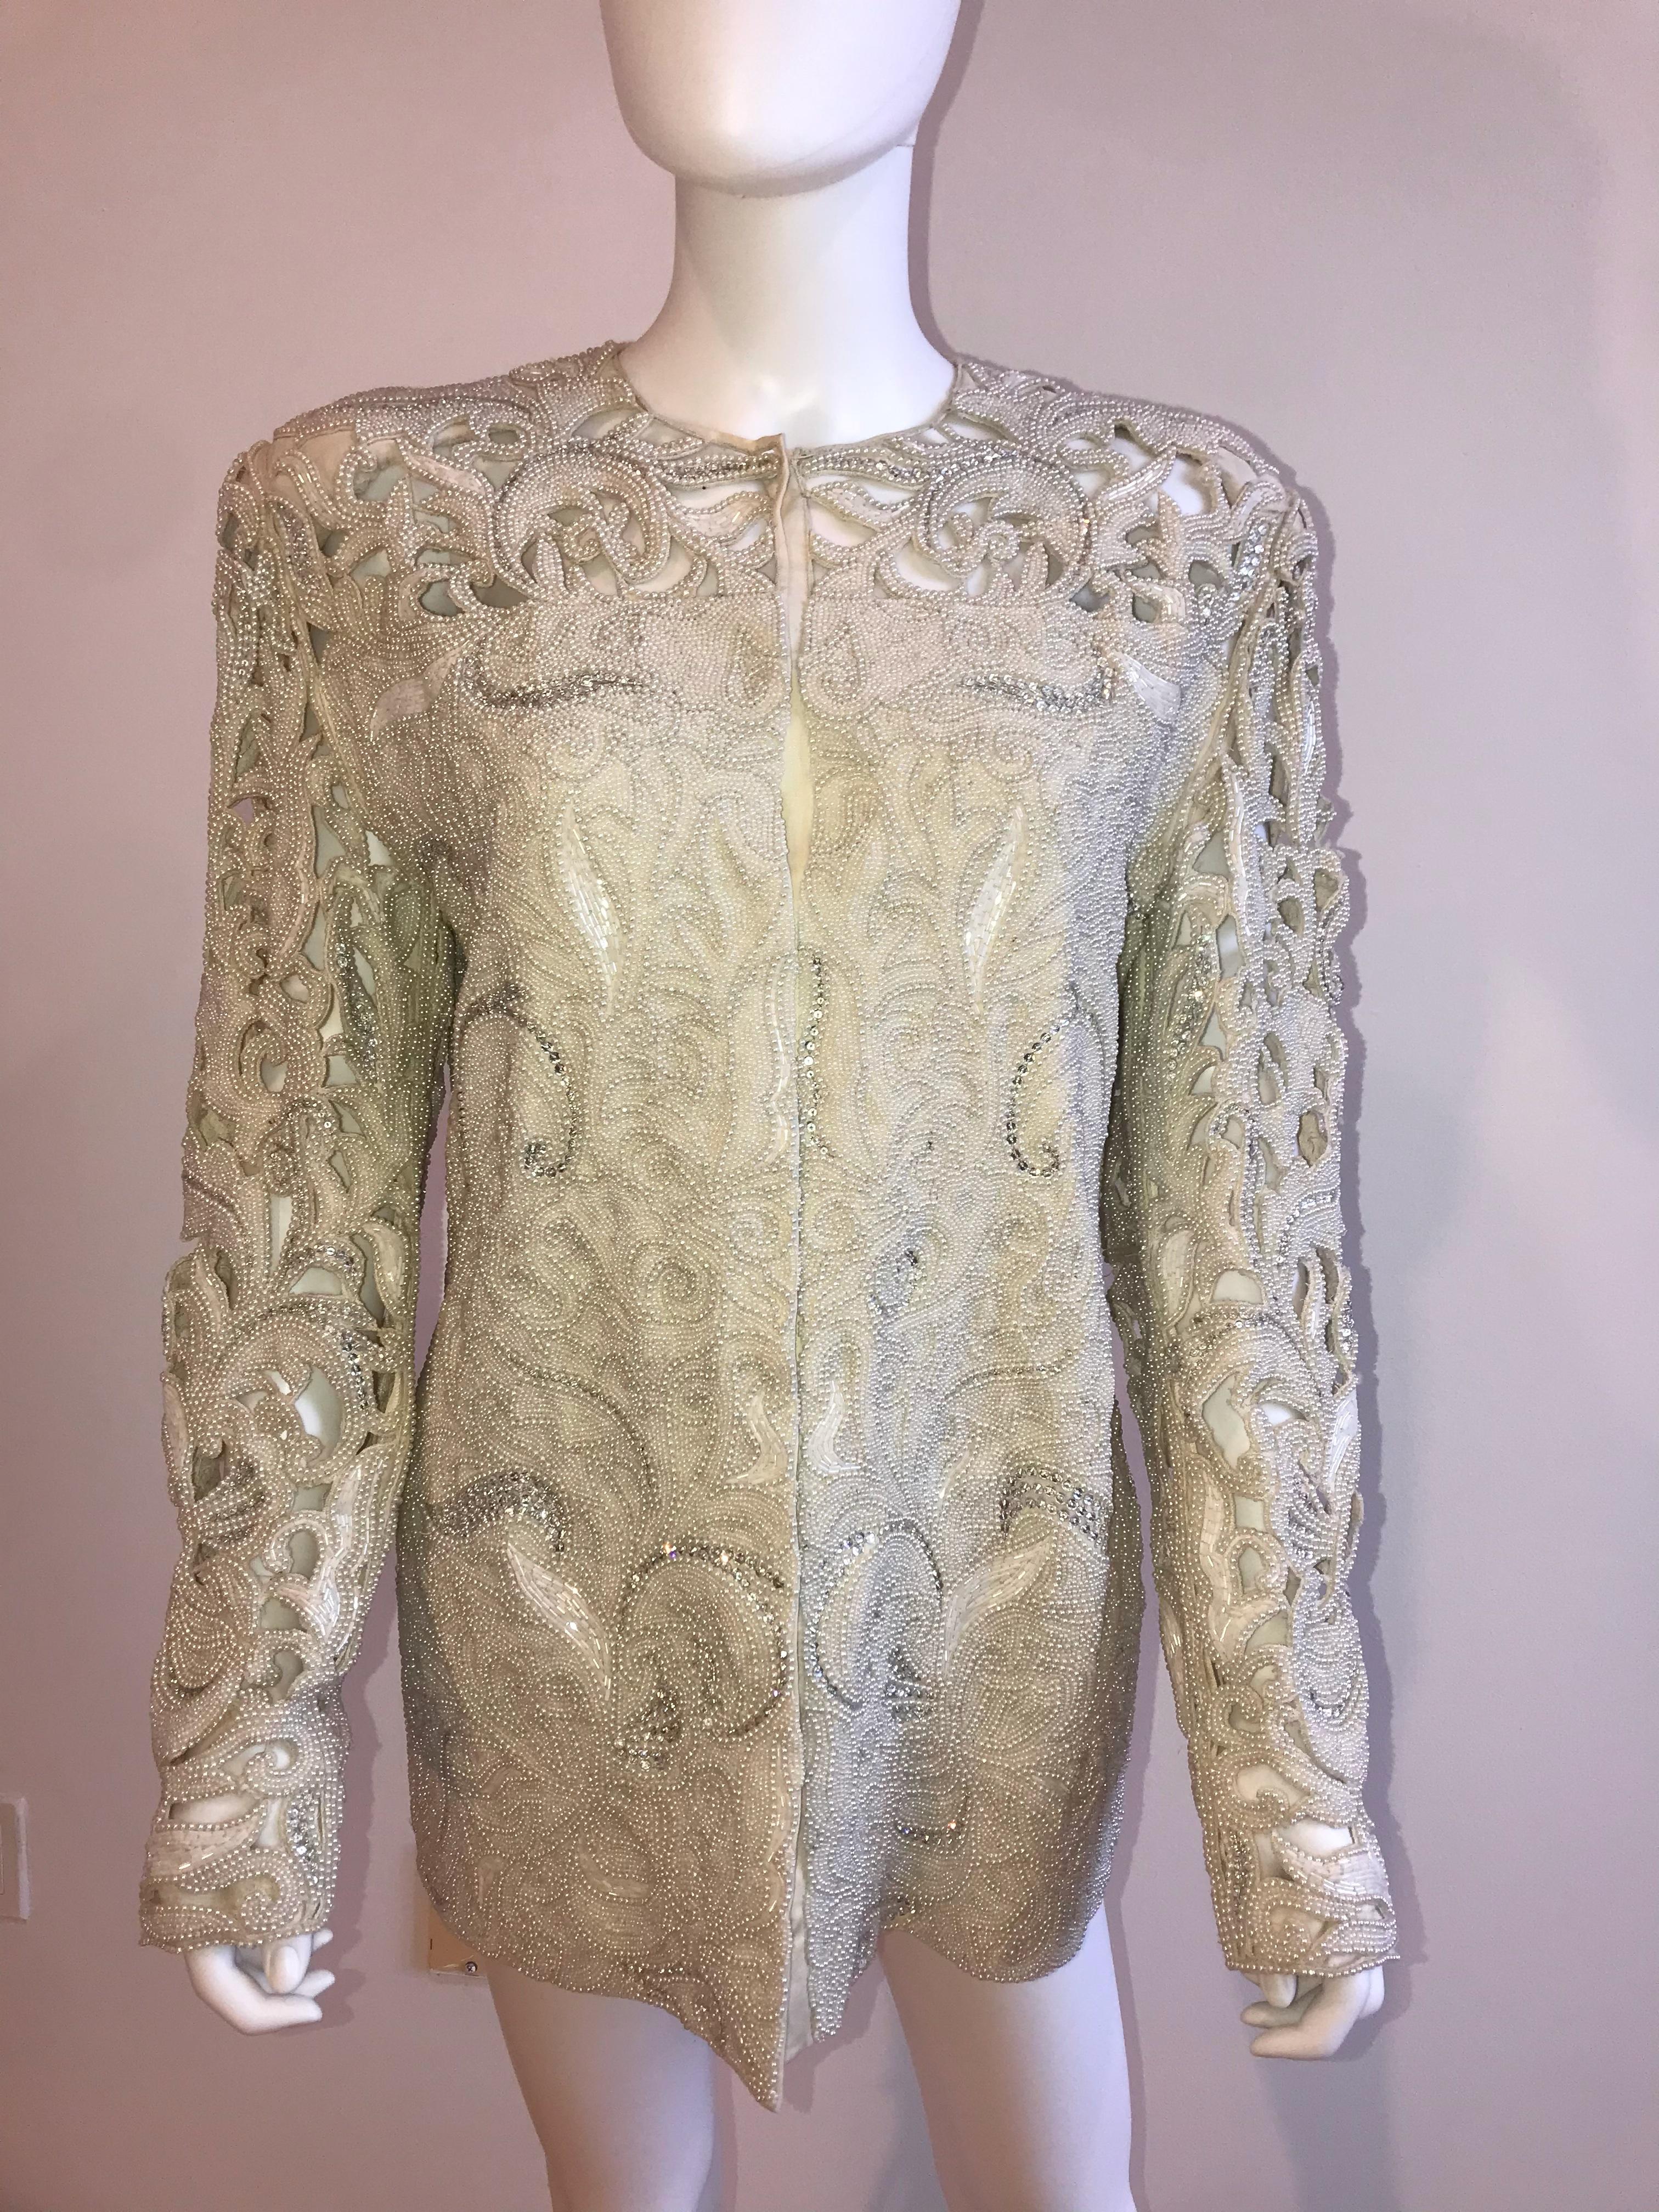 Genny by Gianni Versace Intricate Pearl and Diamond Beaded Cutout Ivory Jacket. Size US 8. Designer tag has been removed.